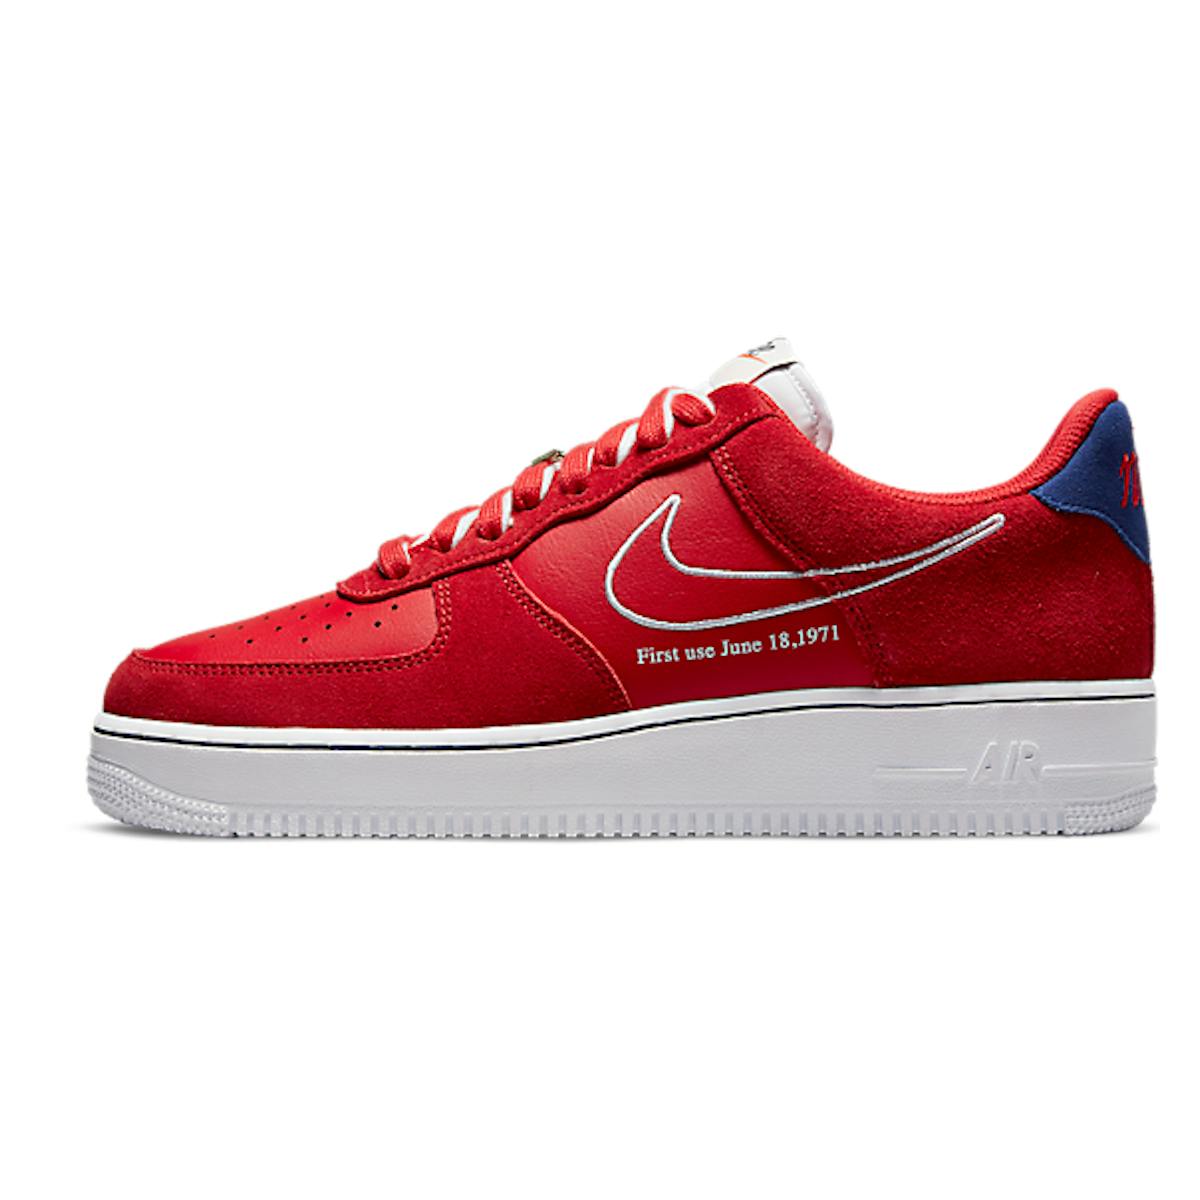 Nike Air Force 1 07 LV8 University Red - First Use